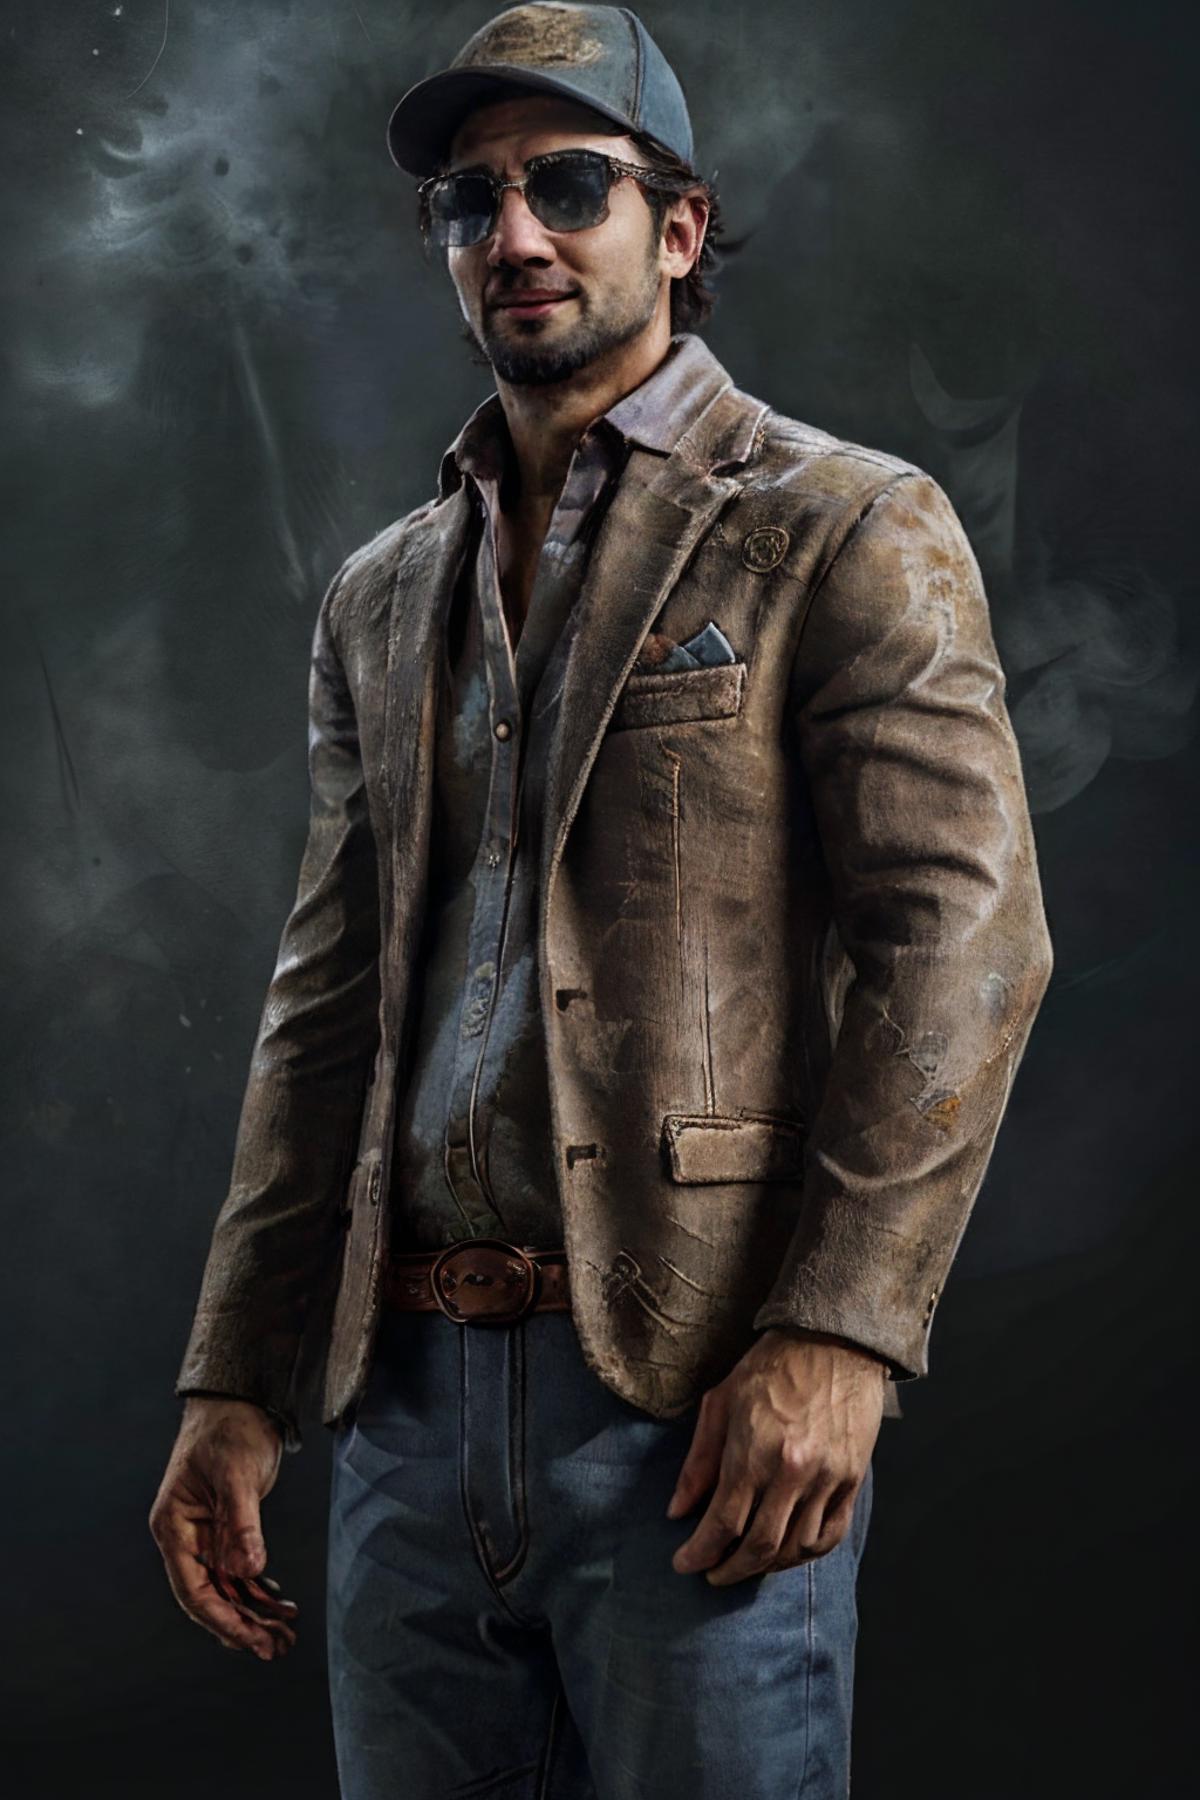 Ace Visconti - Dead By Daylight image by Berthault147